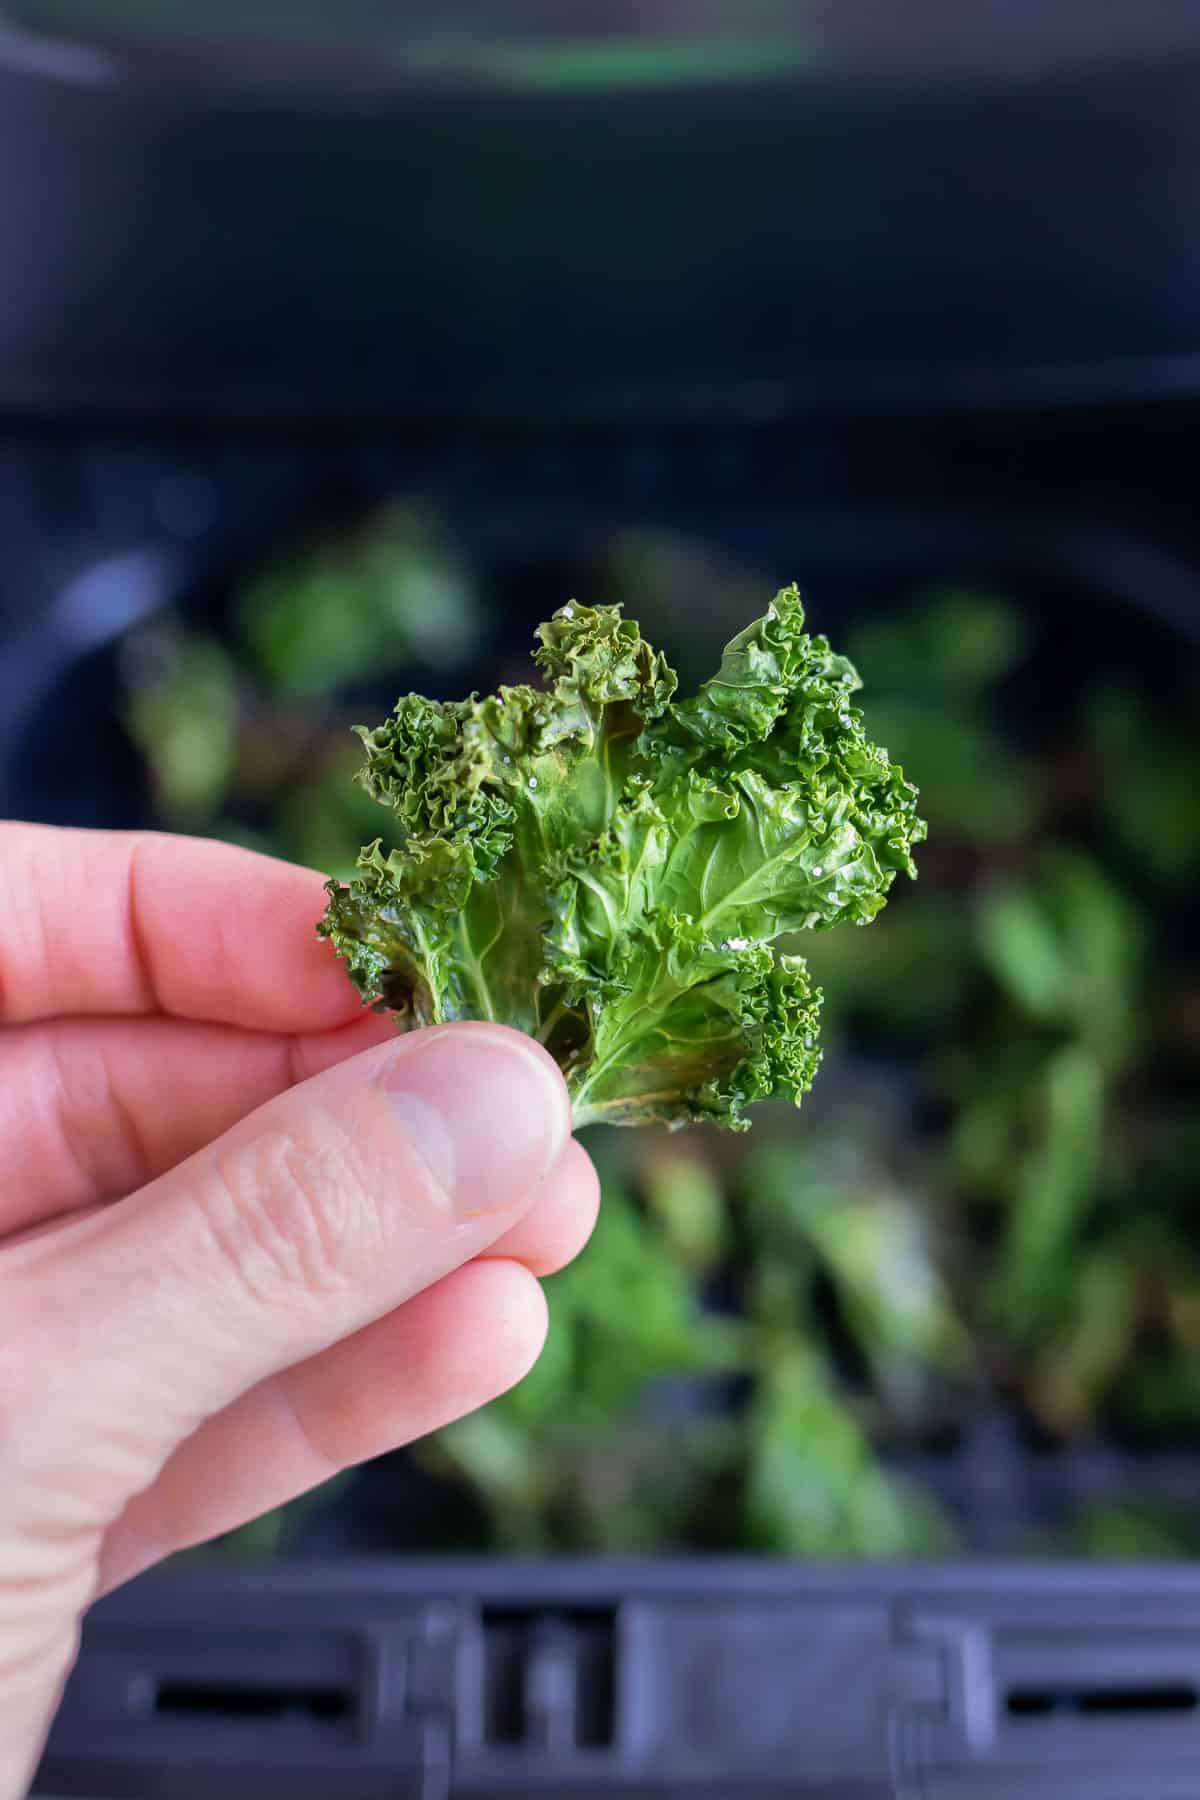 An air fryer kale chip is lifted up from the air fryer tray.